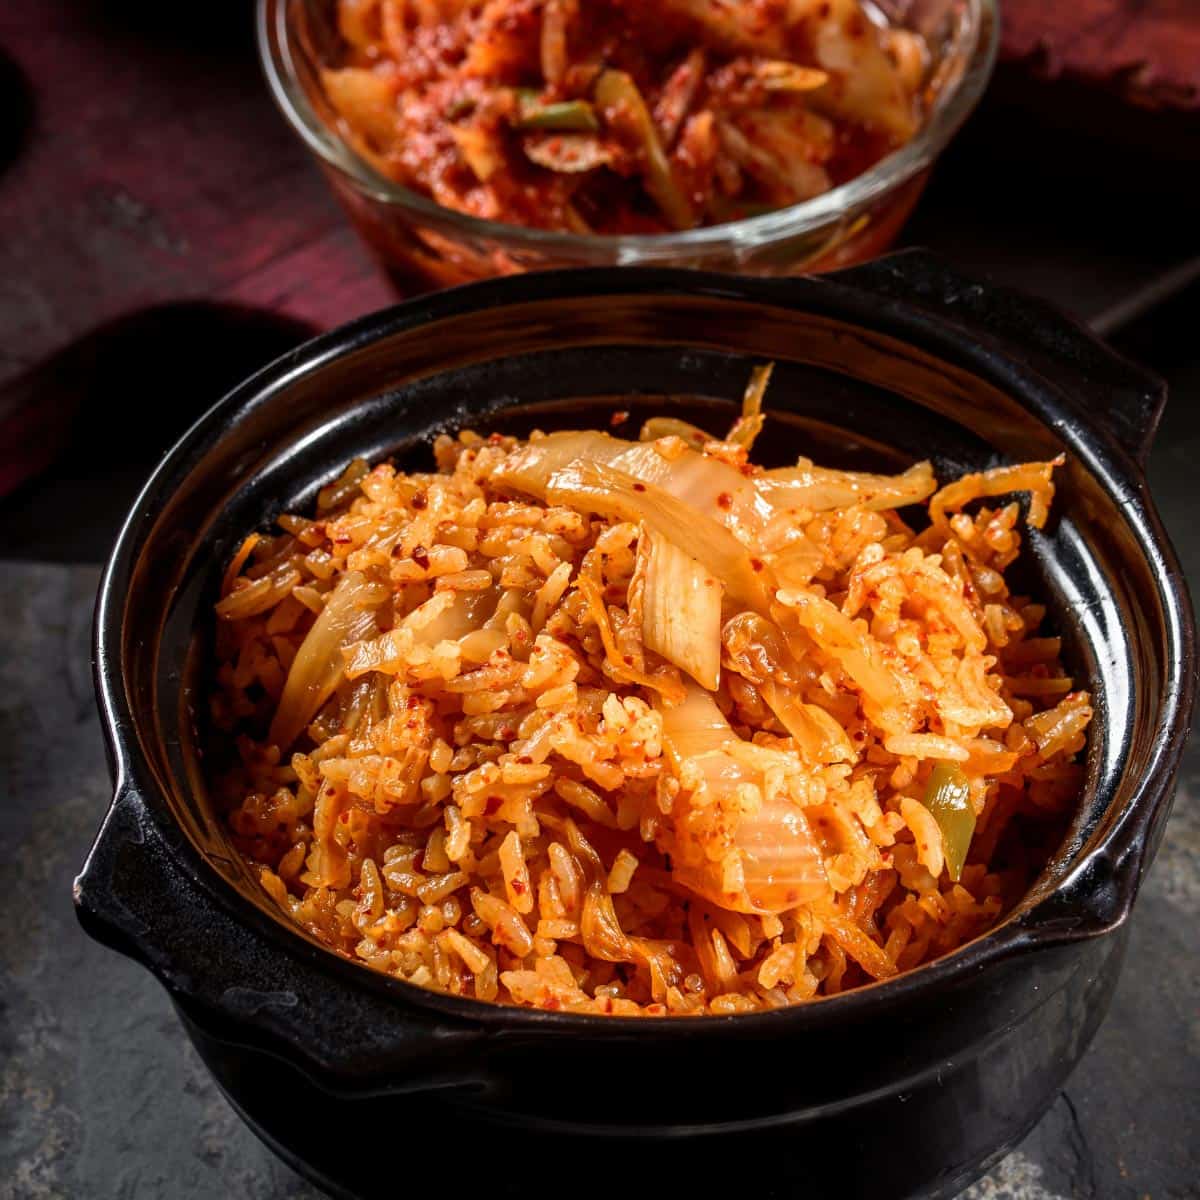 Kimchi fried rice in a black bowl.